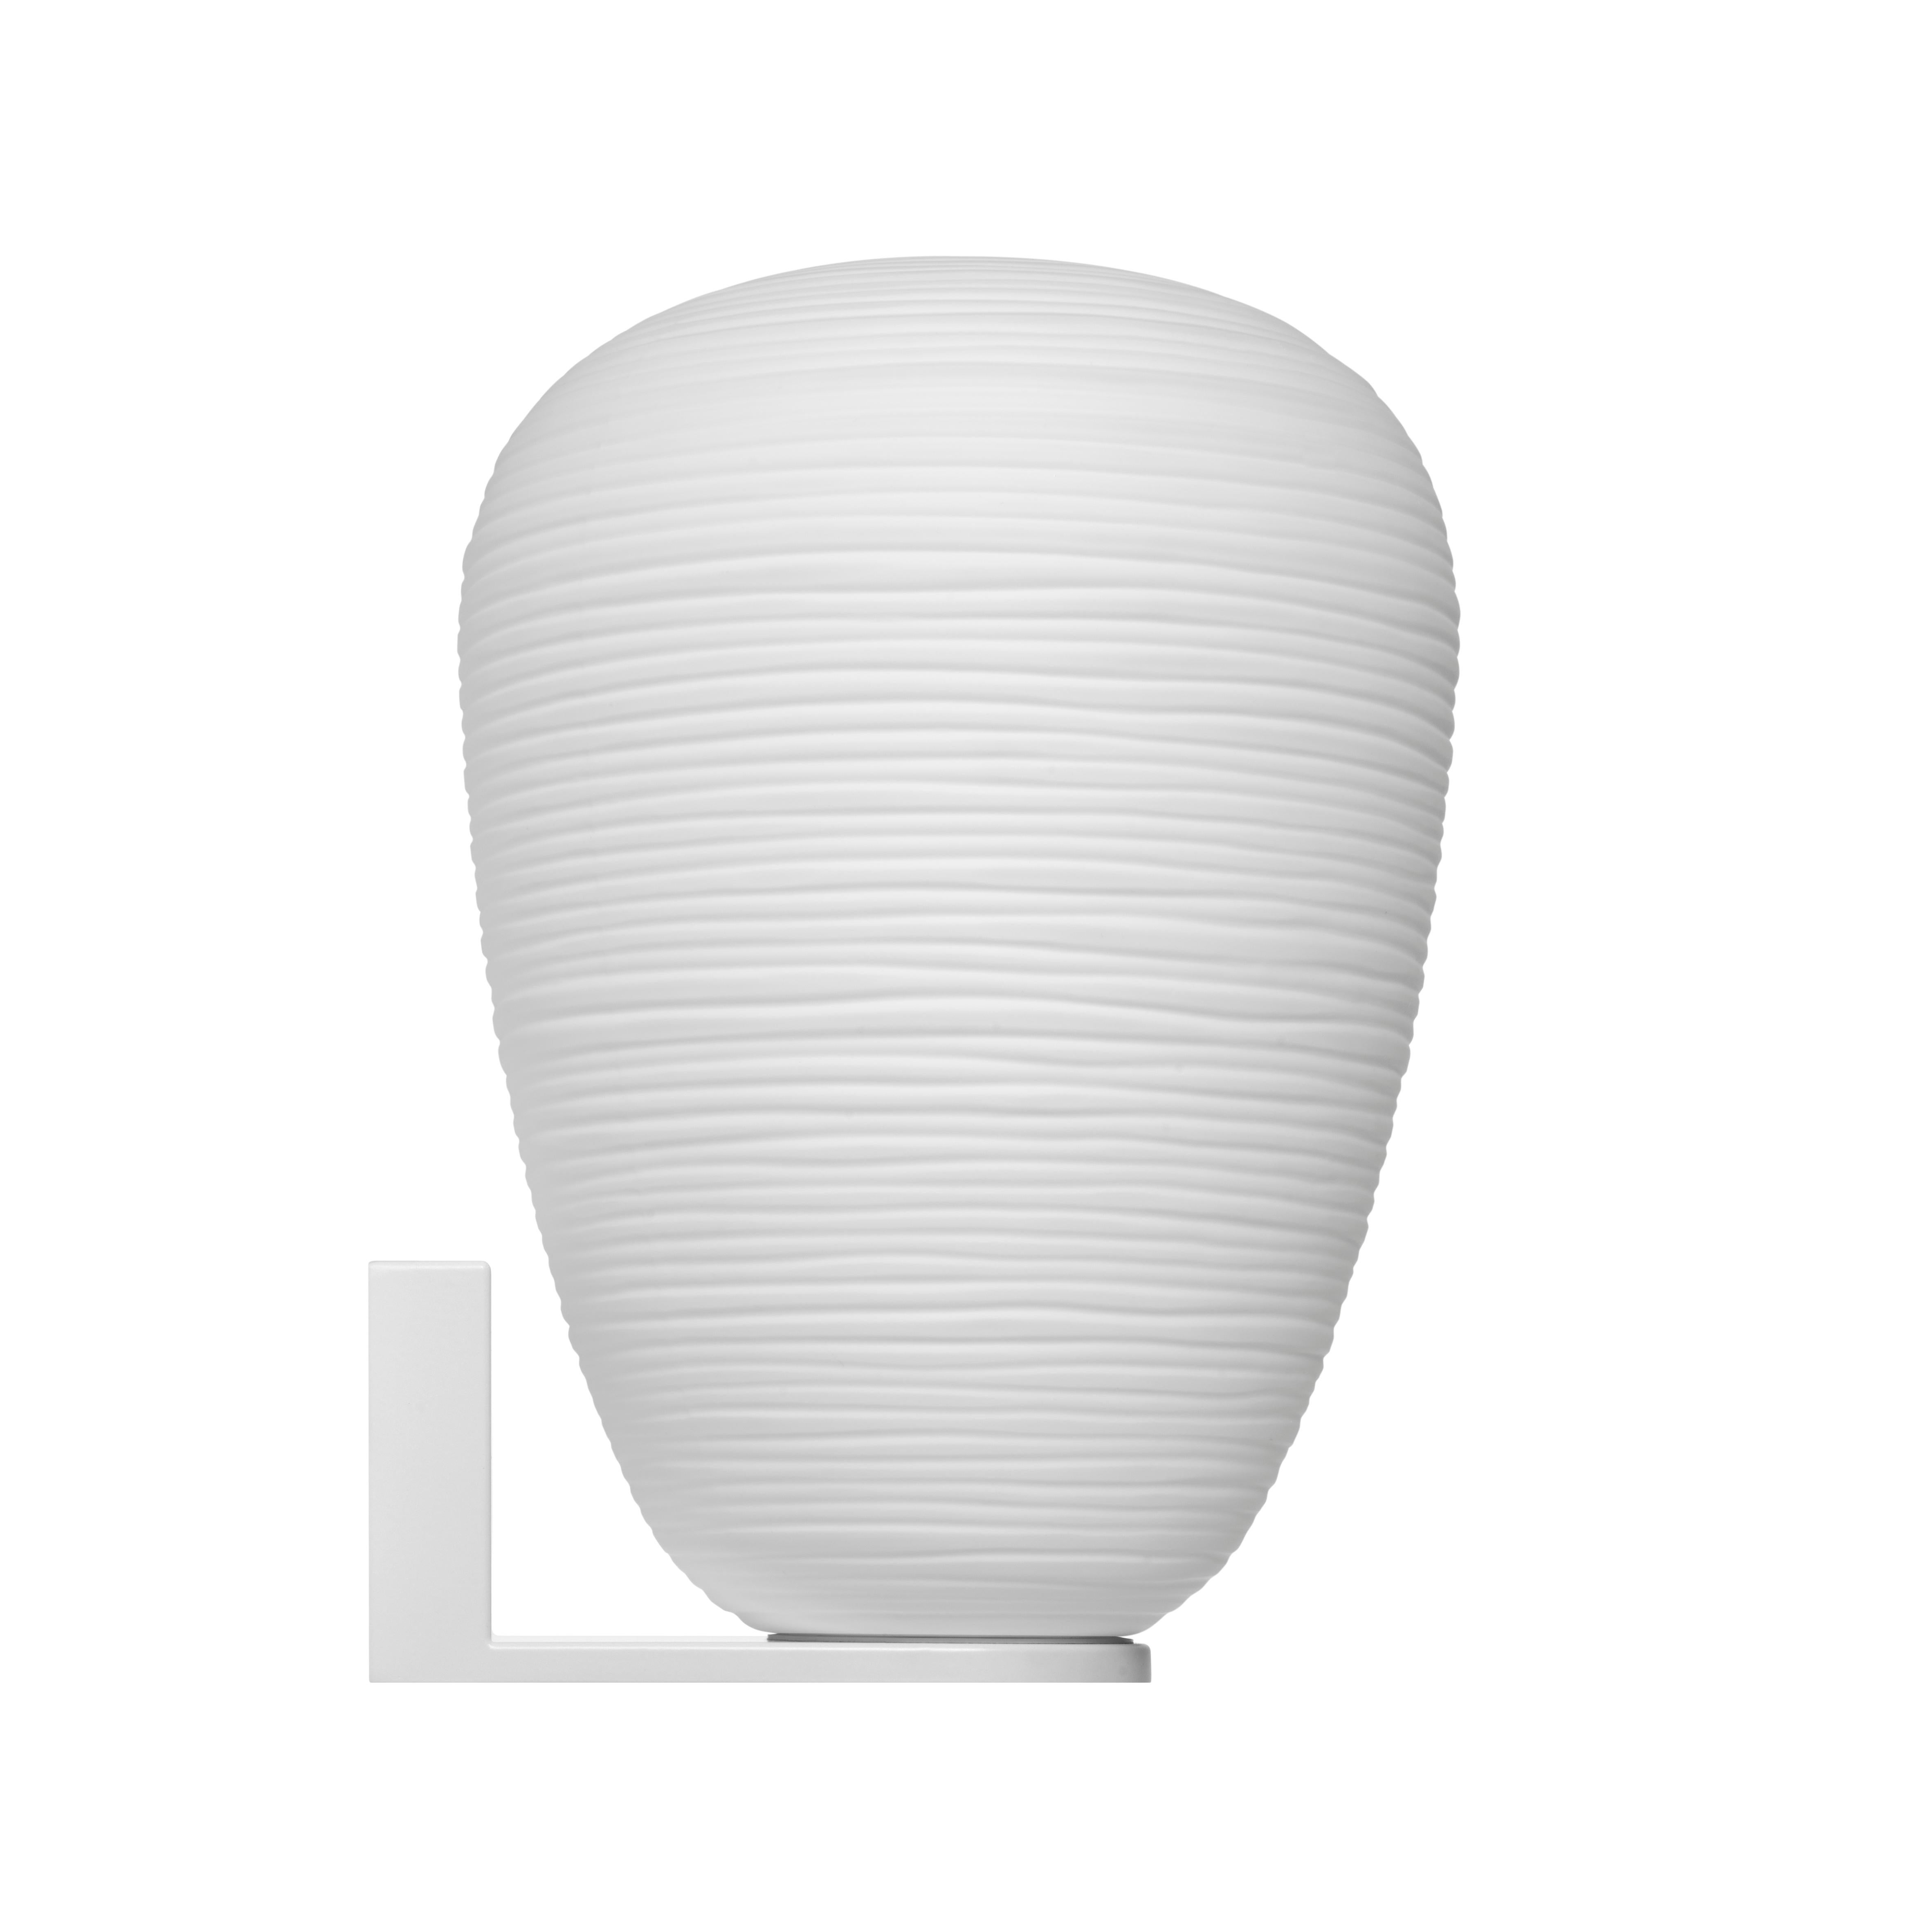 Foscarini Rituals 1 Wall Lamp in White by Ludovica and Roberto Palomba For Sale